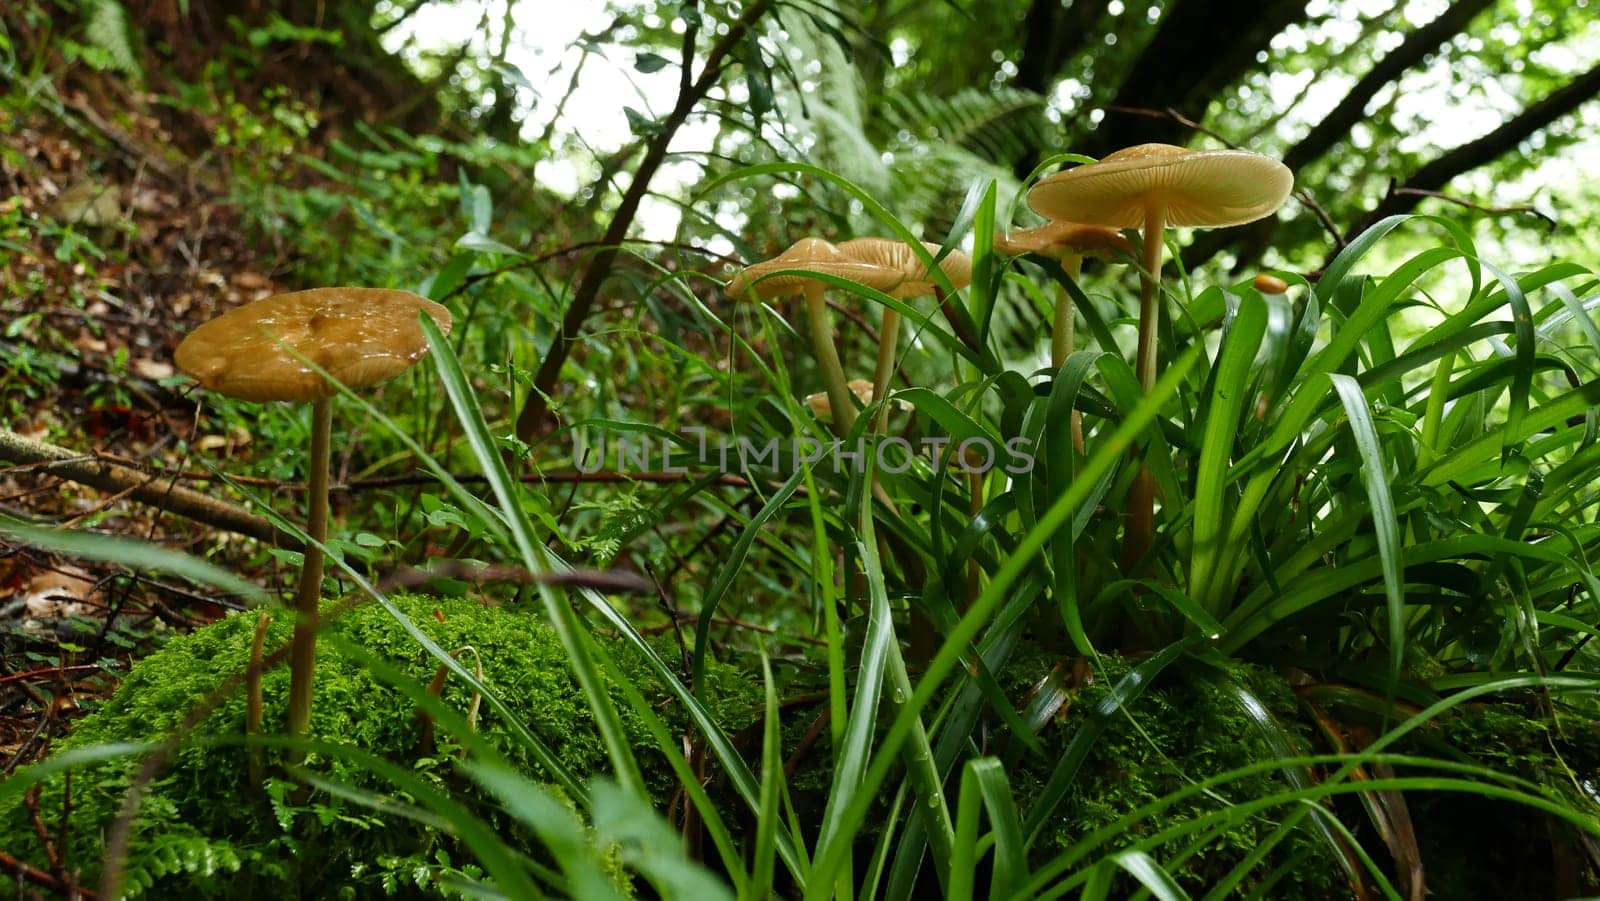 Group of mushrooms among the forest vegetation by XabiDonostia